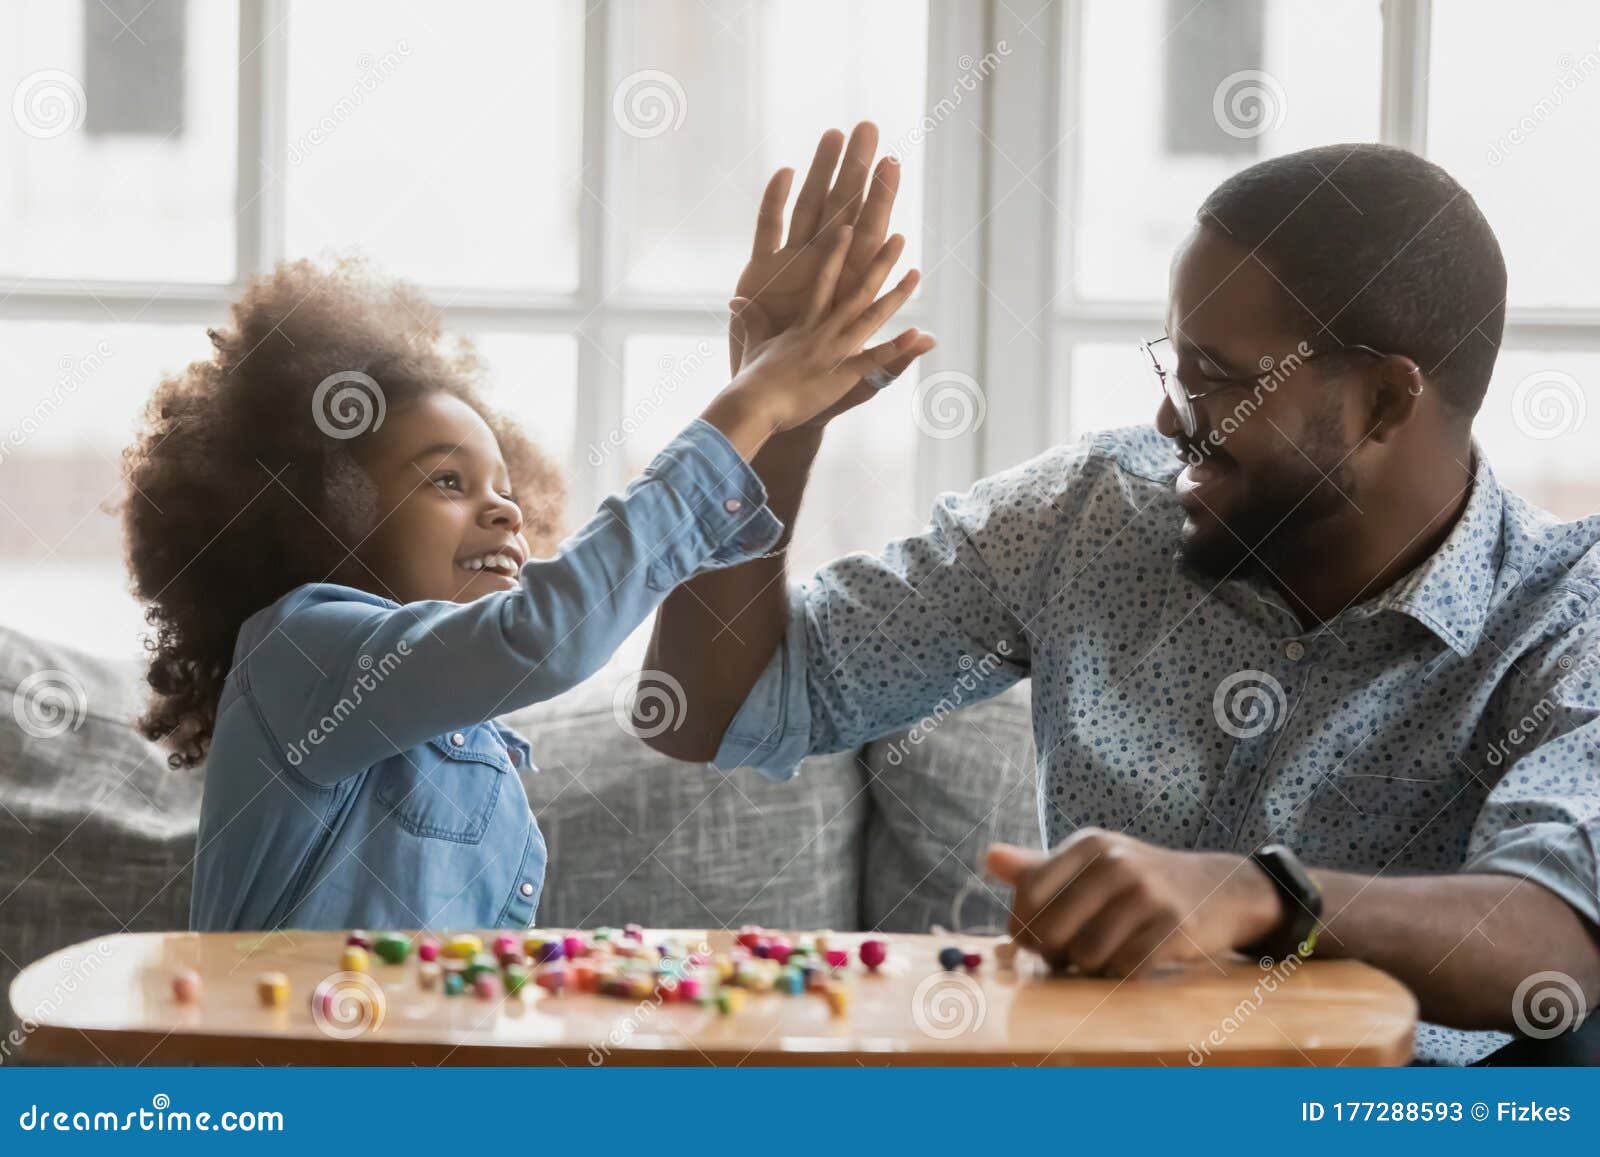 african daughter gives high five to father starting pastime activity